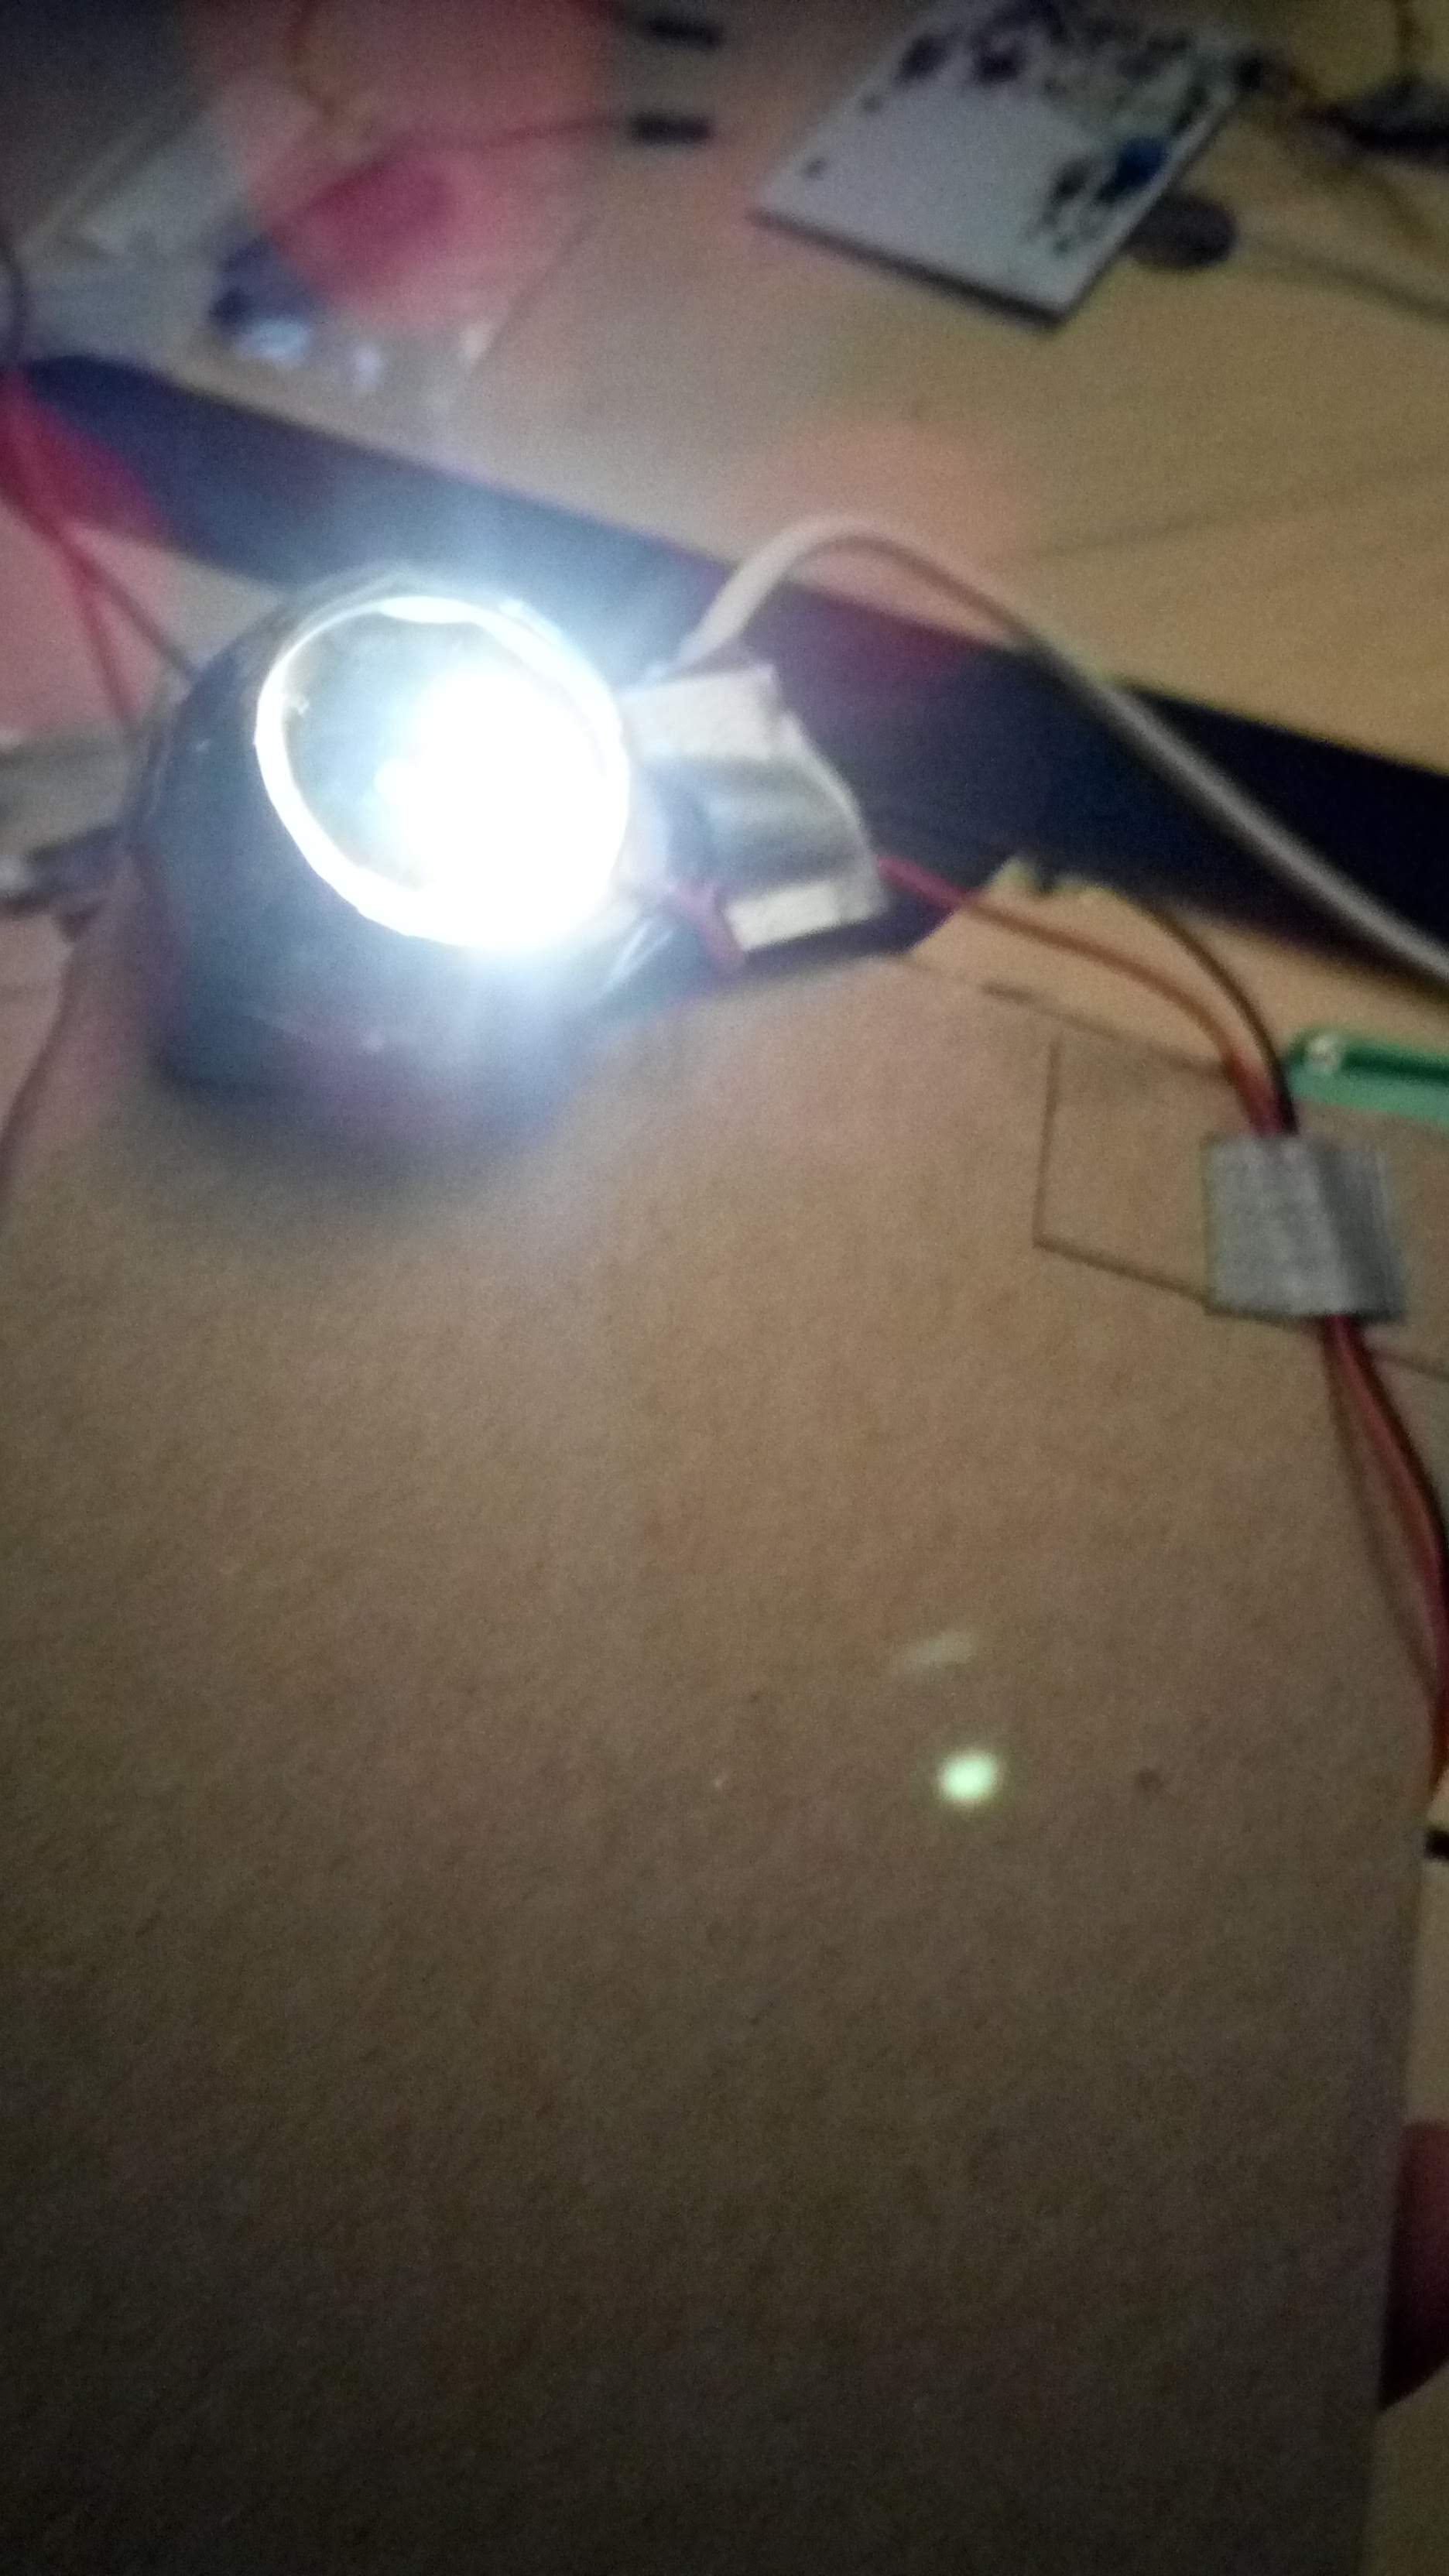 LED mounted on the microscope